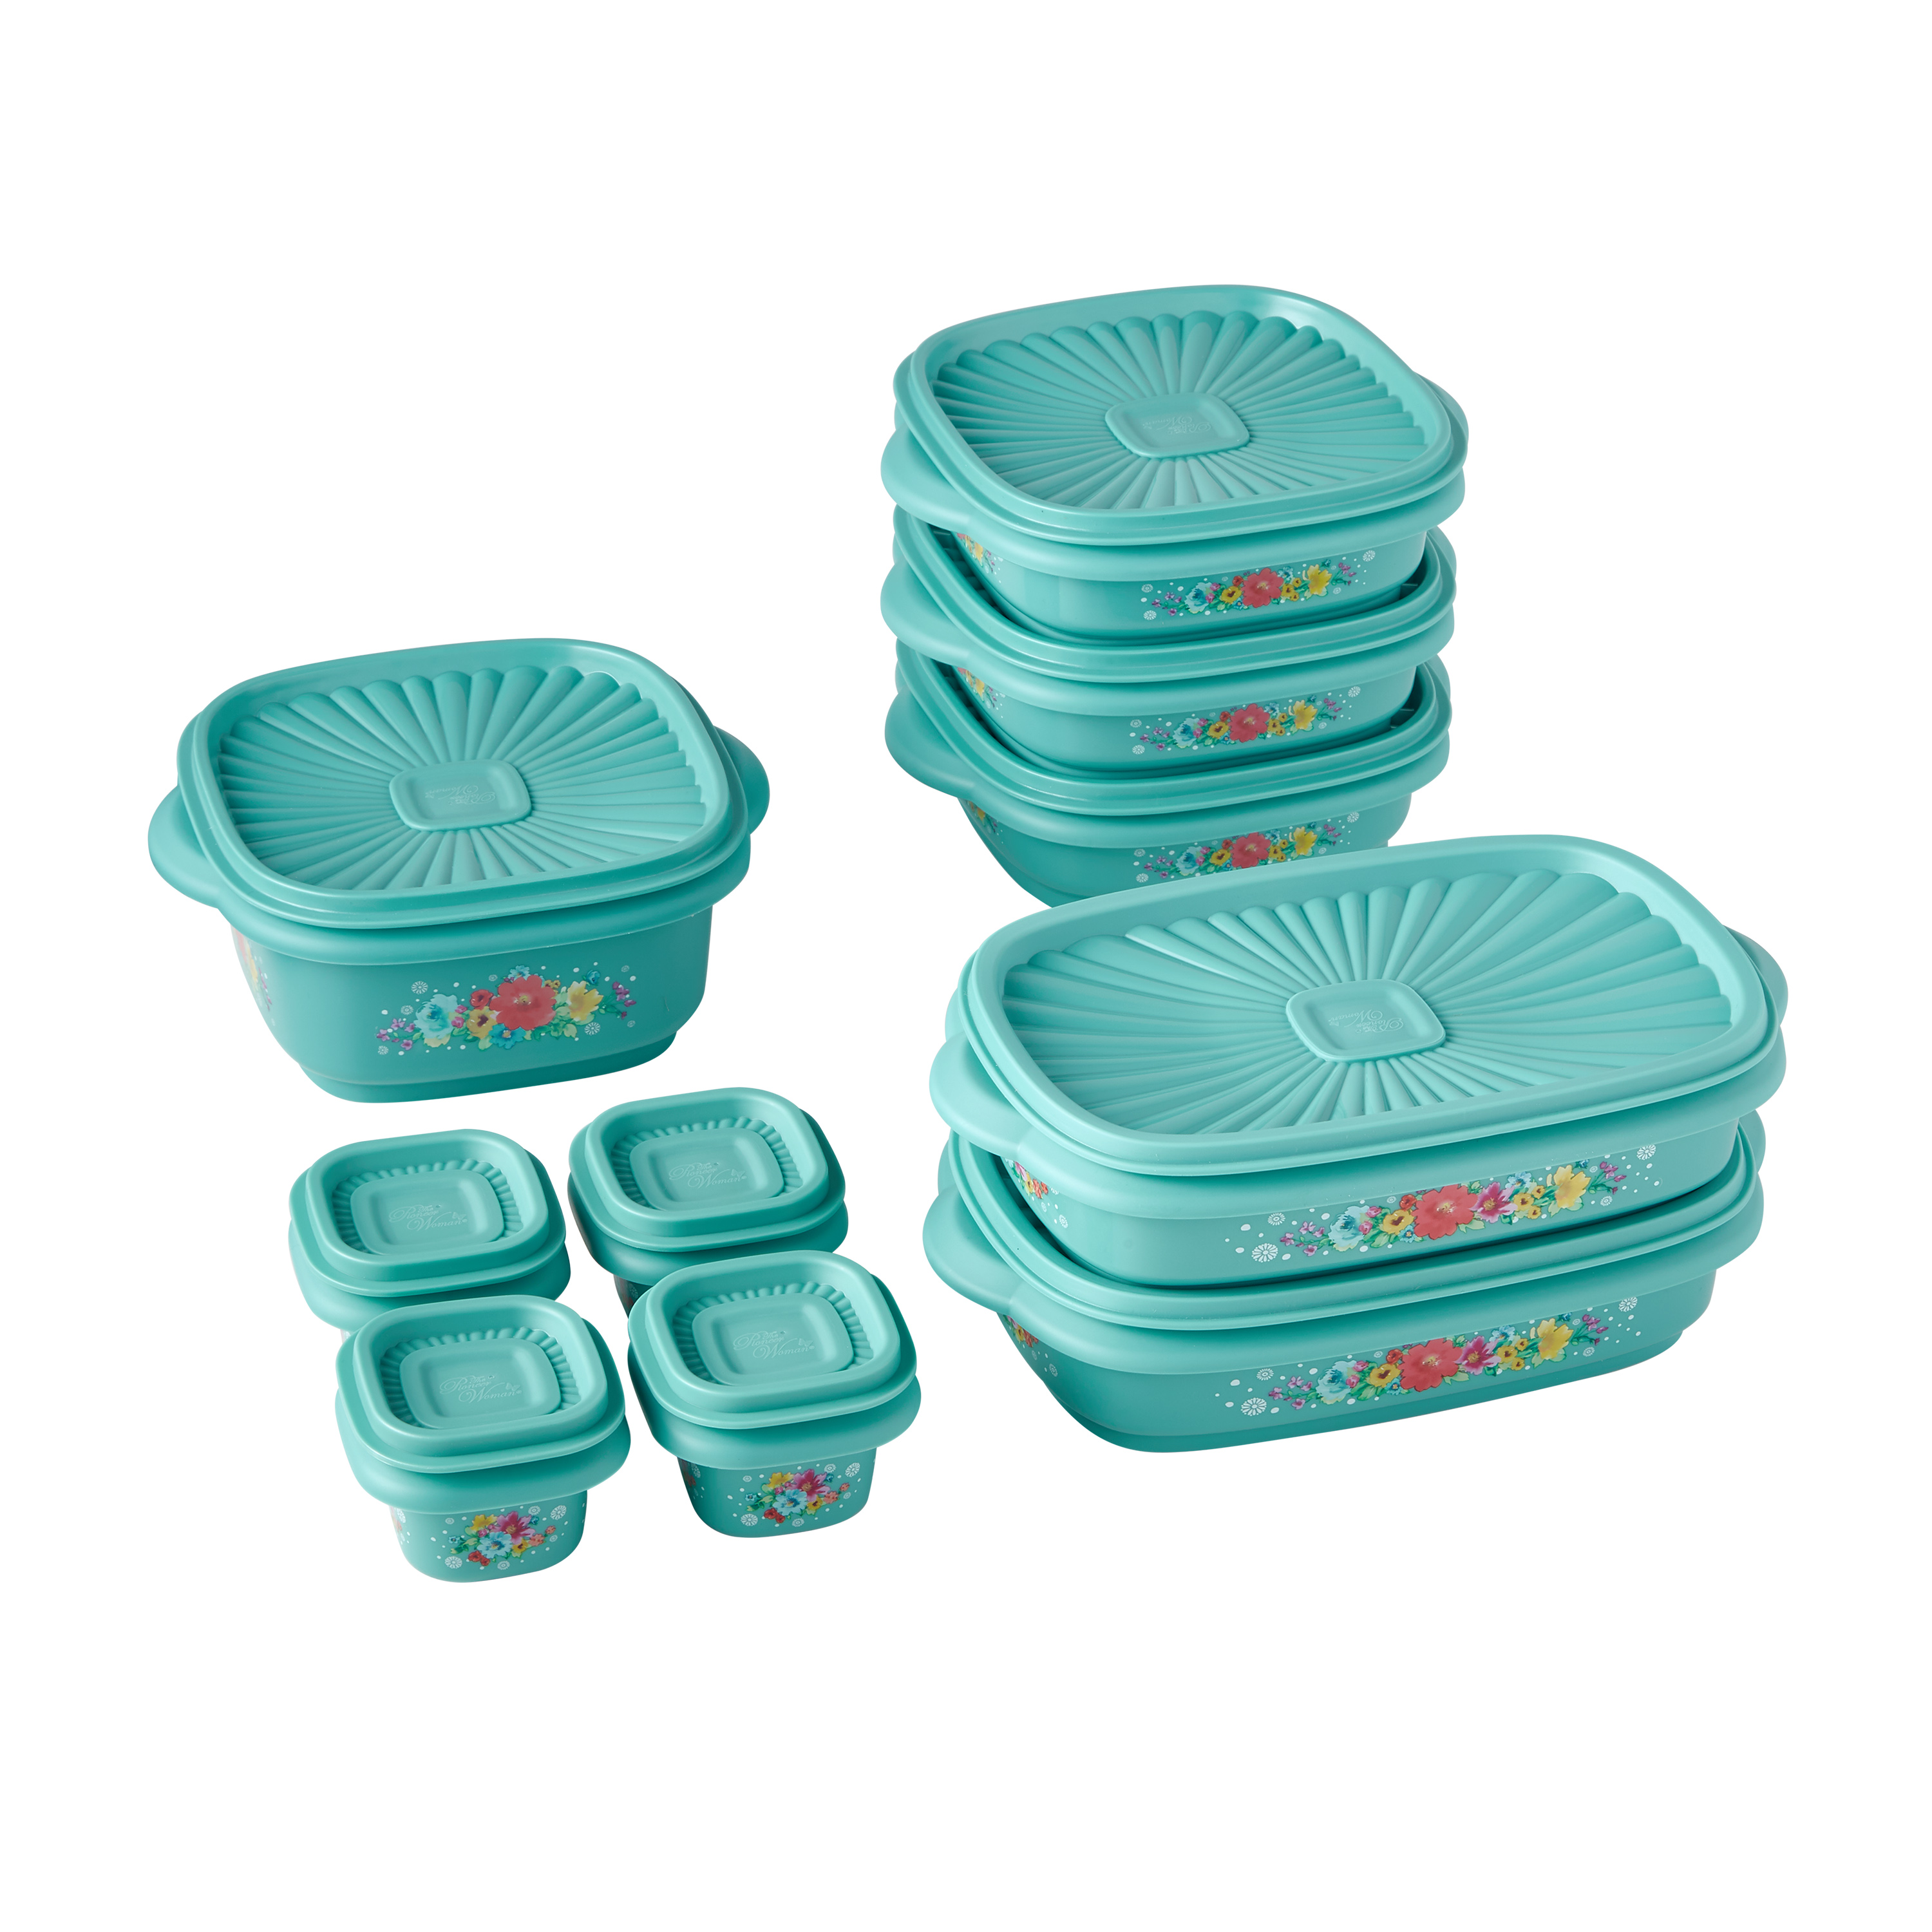 The Pioneer Woman 20 Piece Plastic Food Storage Container Variety Set, Breezy Blossom - image 1 of 5